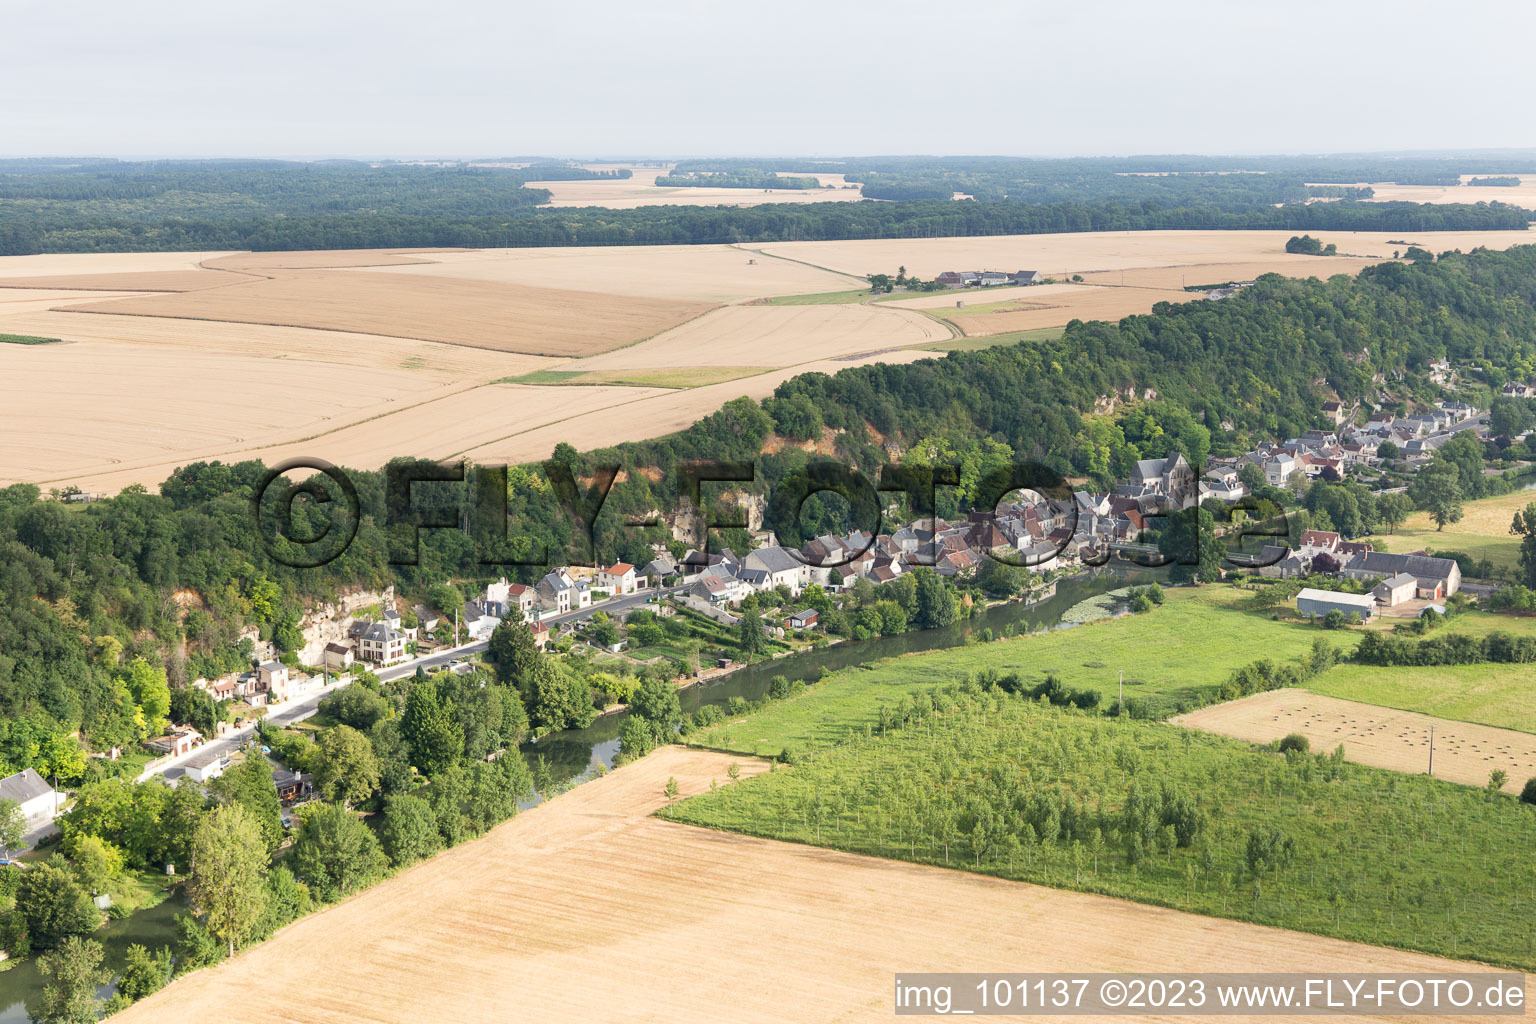 Saint-Rimay in the state Loir et Cher, France from above